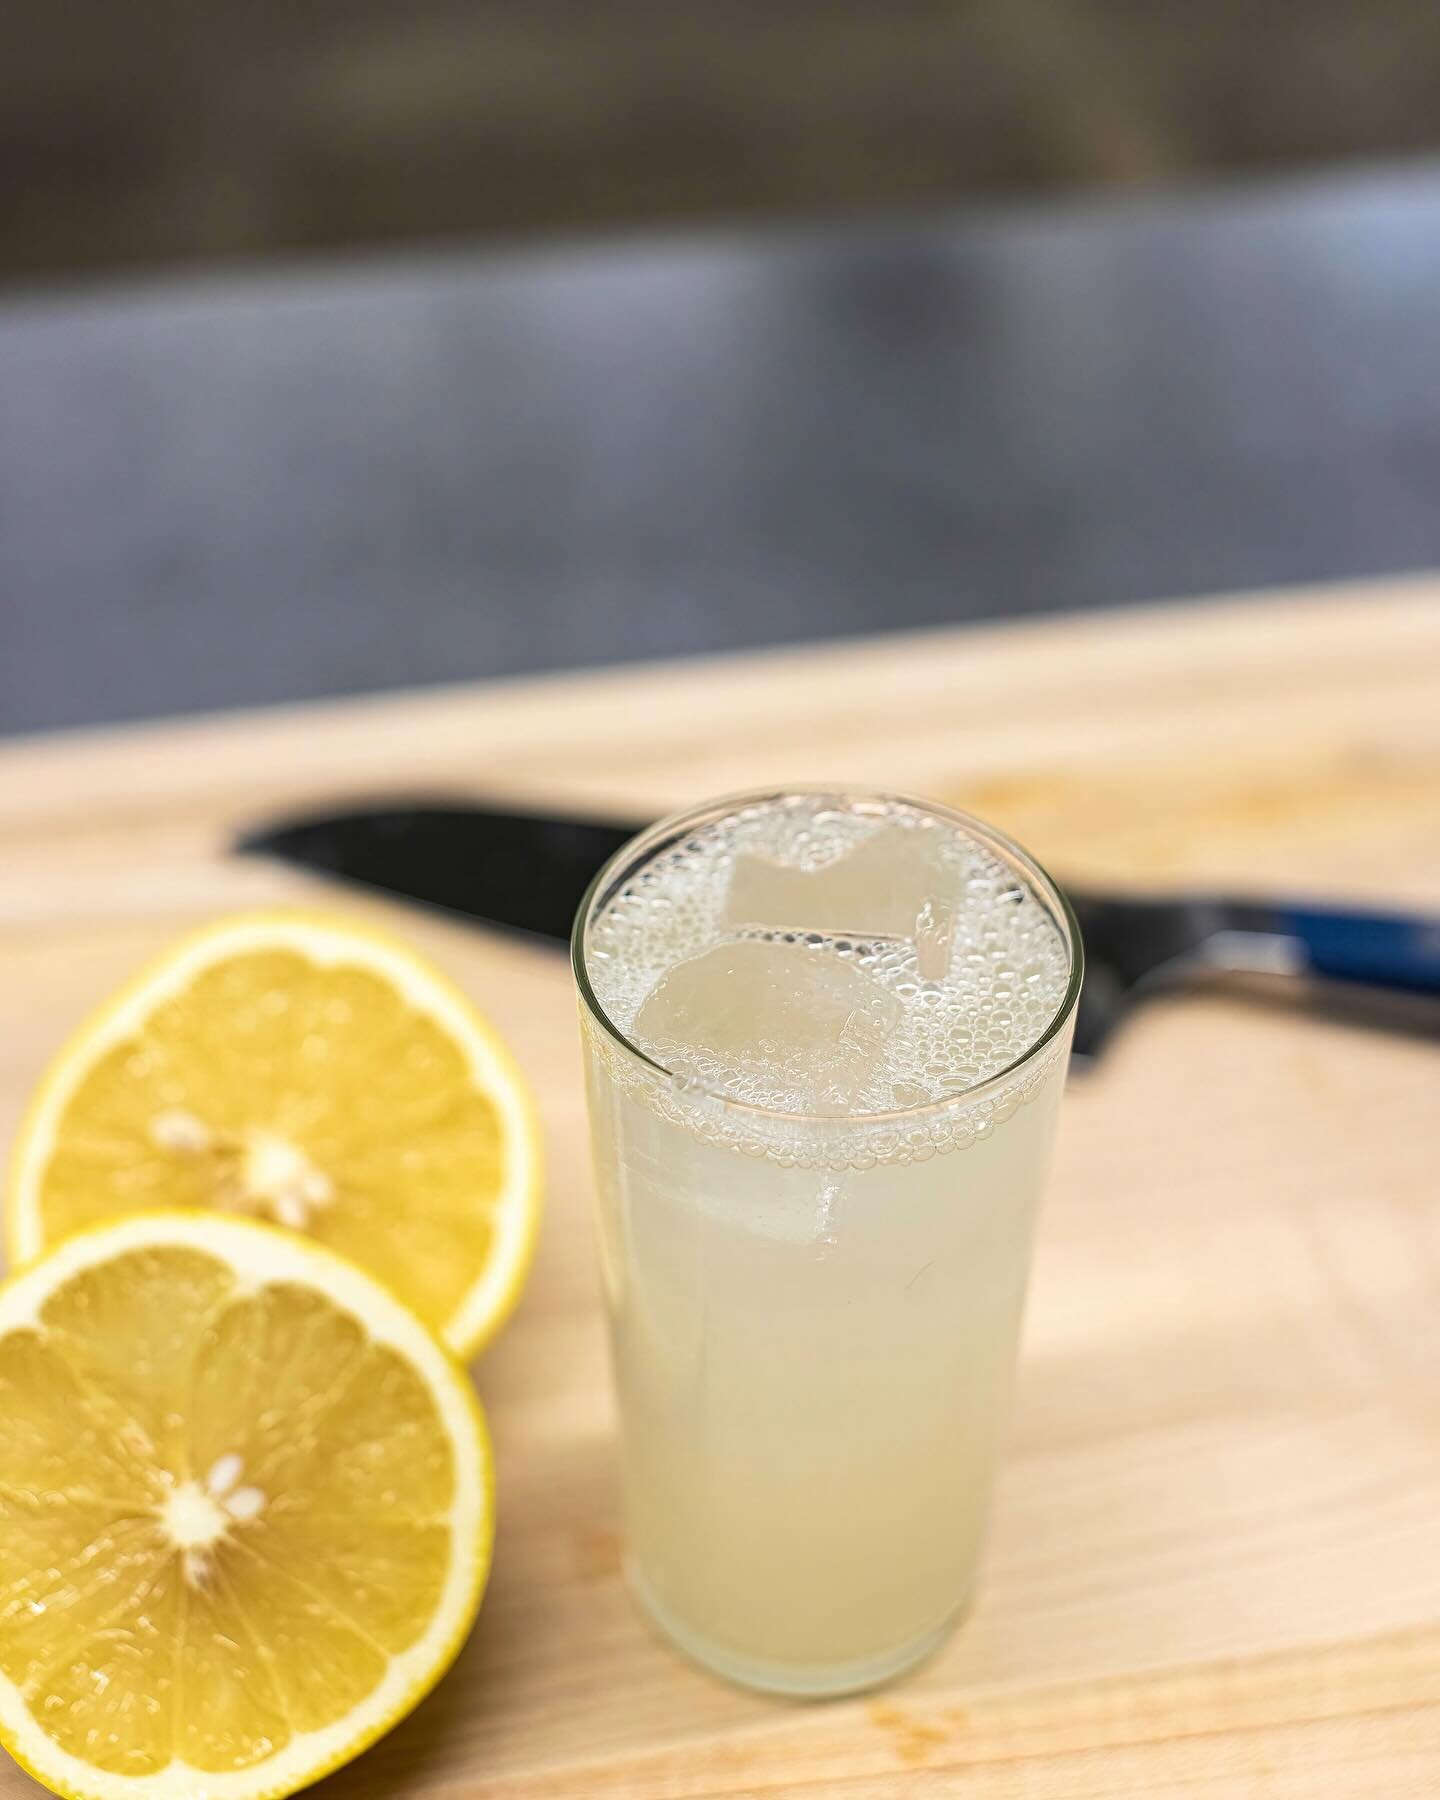 WHITE GRAPEFRUIT HIGHBALL (10.5% abv) made with vodka, white grapefruit two-ways, and champagne-seltzer. 

We tracked down some hard-to-find Marsh white grapefruits from Florida&rsquo;s @halegroves and work them two ways: in a sugar sherbet and a hom